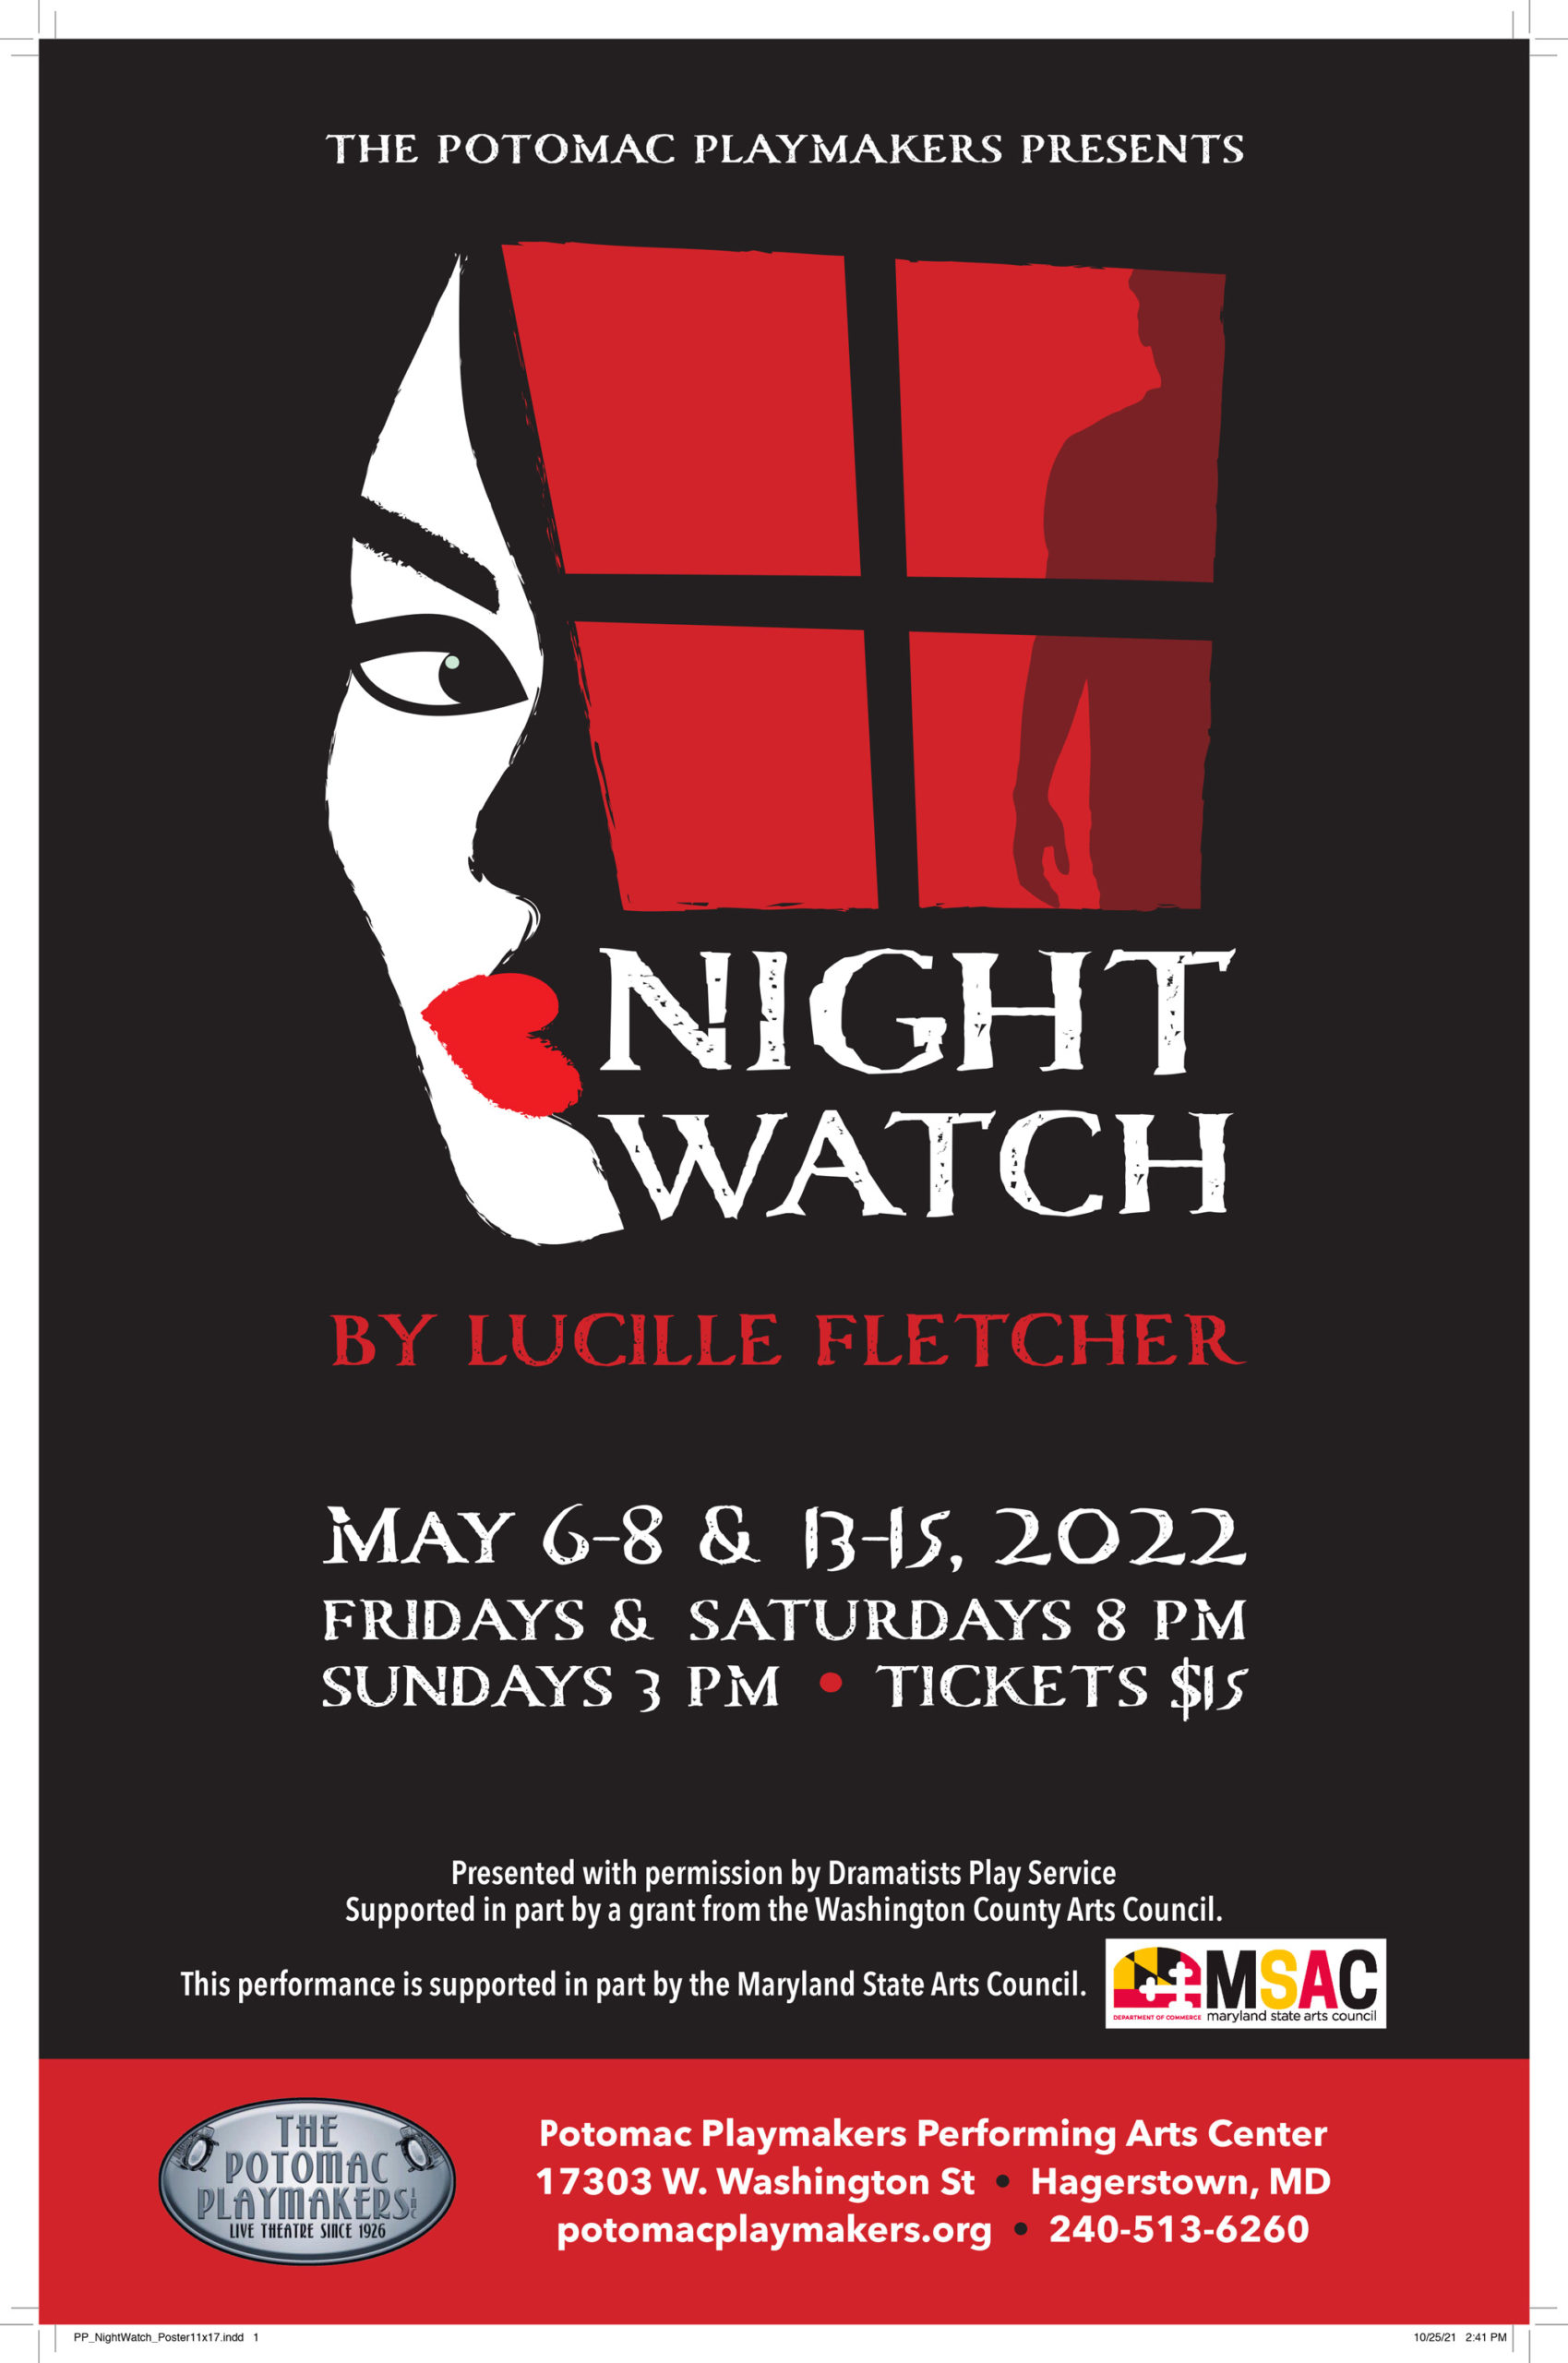 Get your tickets for “Night Watch” May 6-13